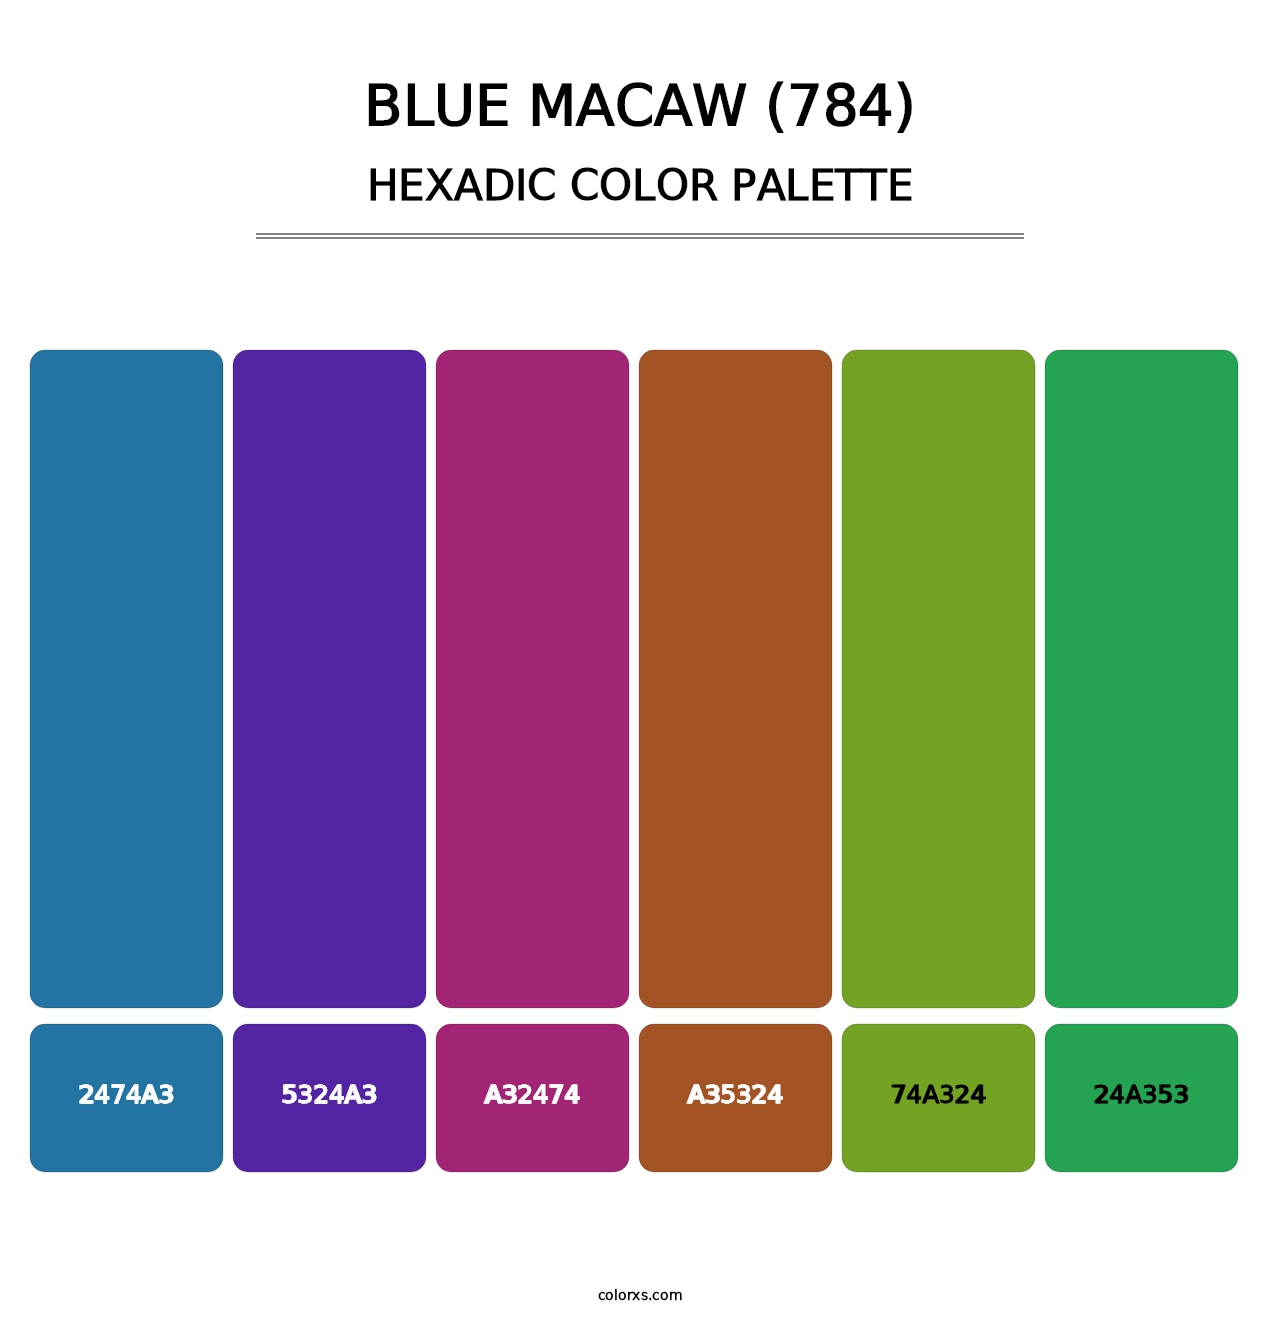 Blue Macaw (784) - Hexadic Color Palette